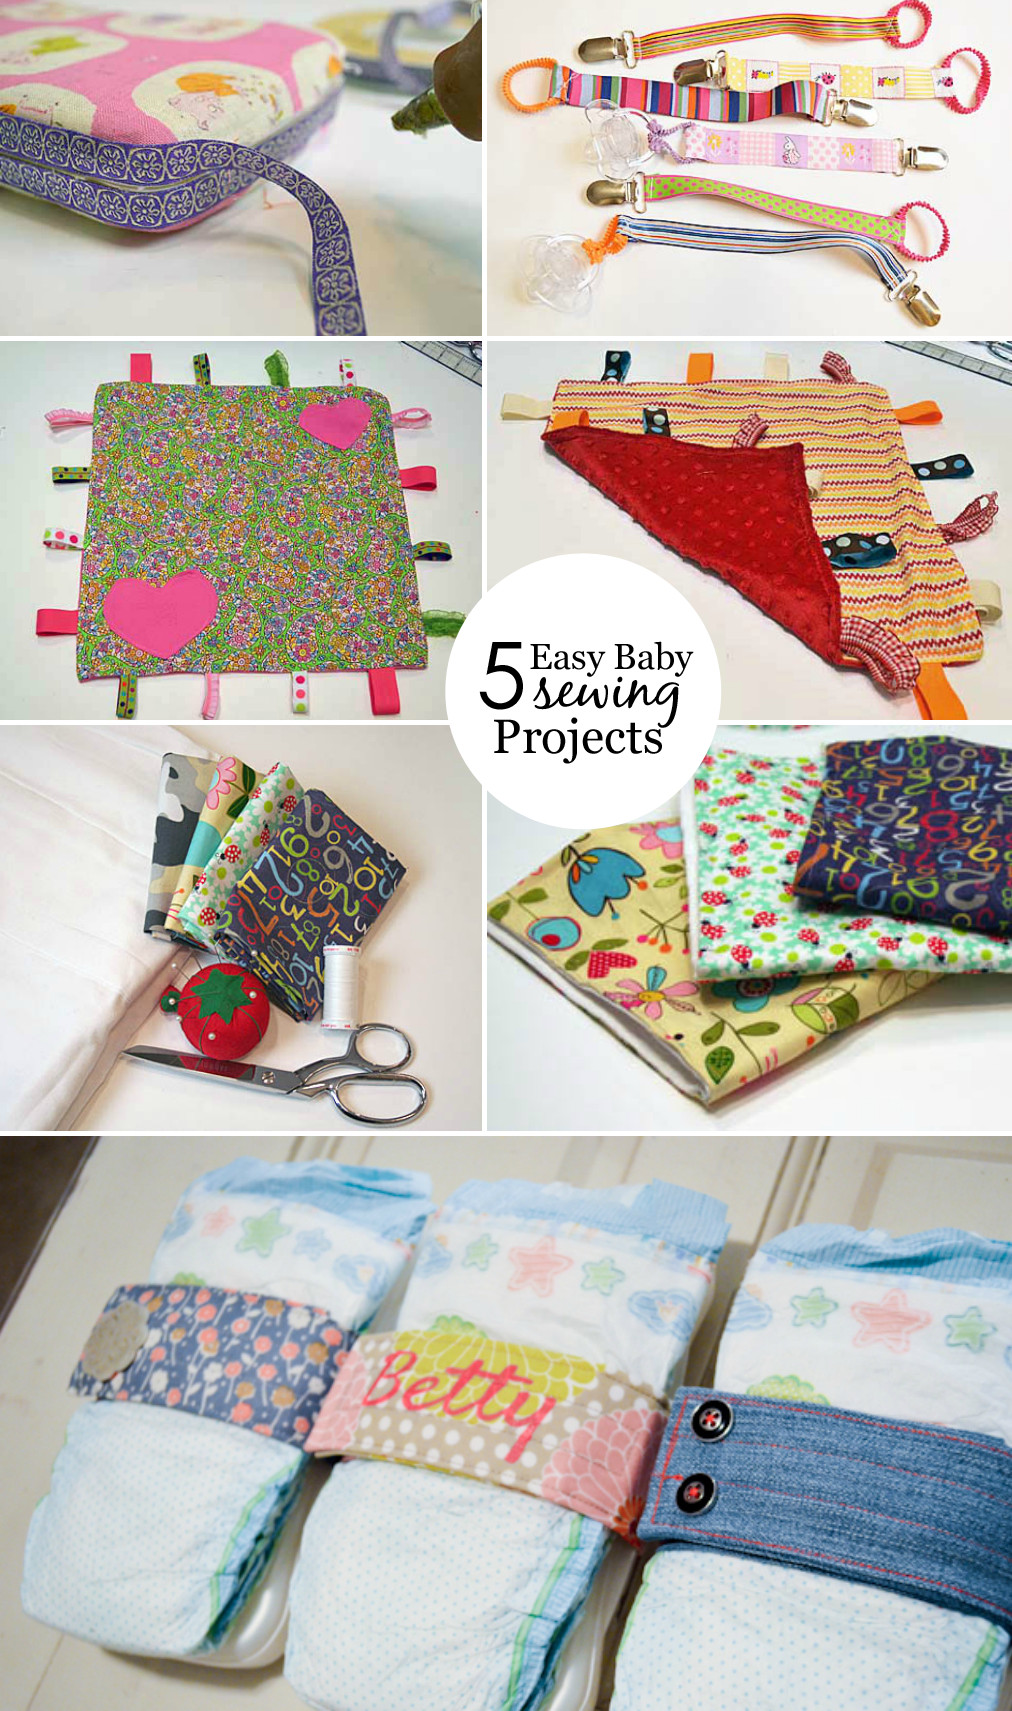 DIY Baby Crafts
 Easy Baby Sewing Projects Project Nursery